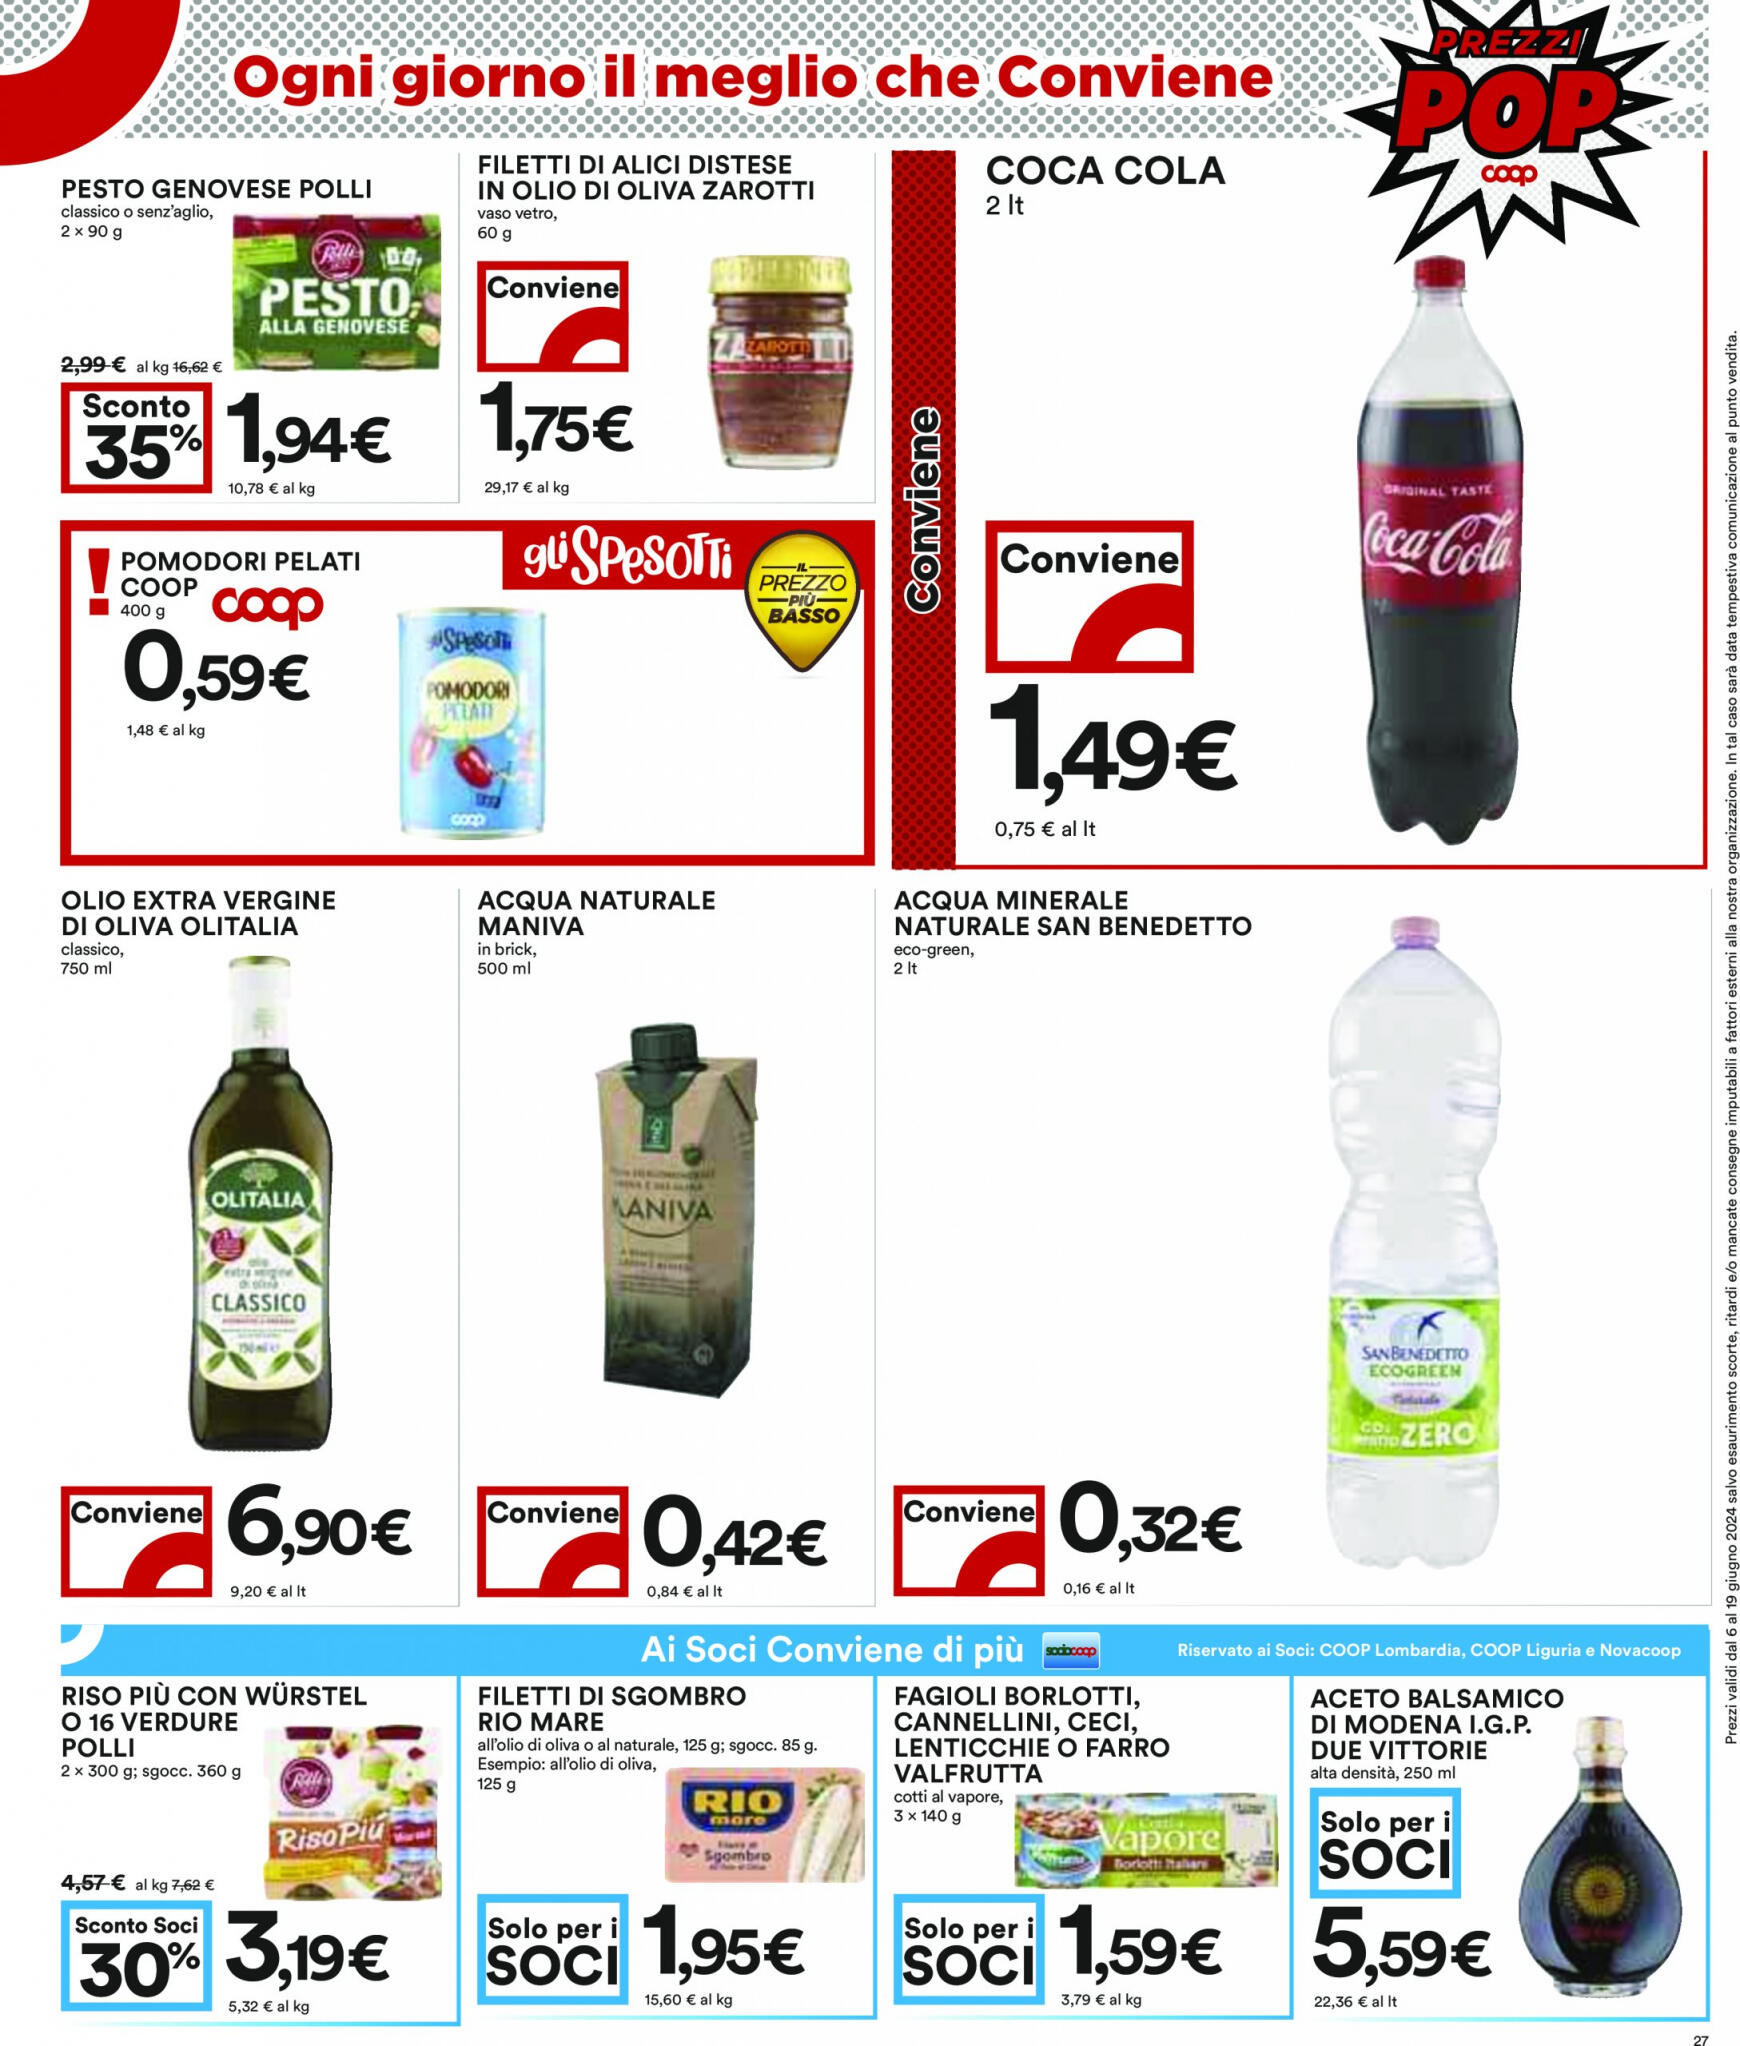 coop - Nuovo volantino Coop 10.06. - 19.06. - page: 27